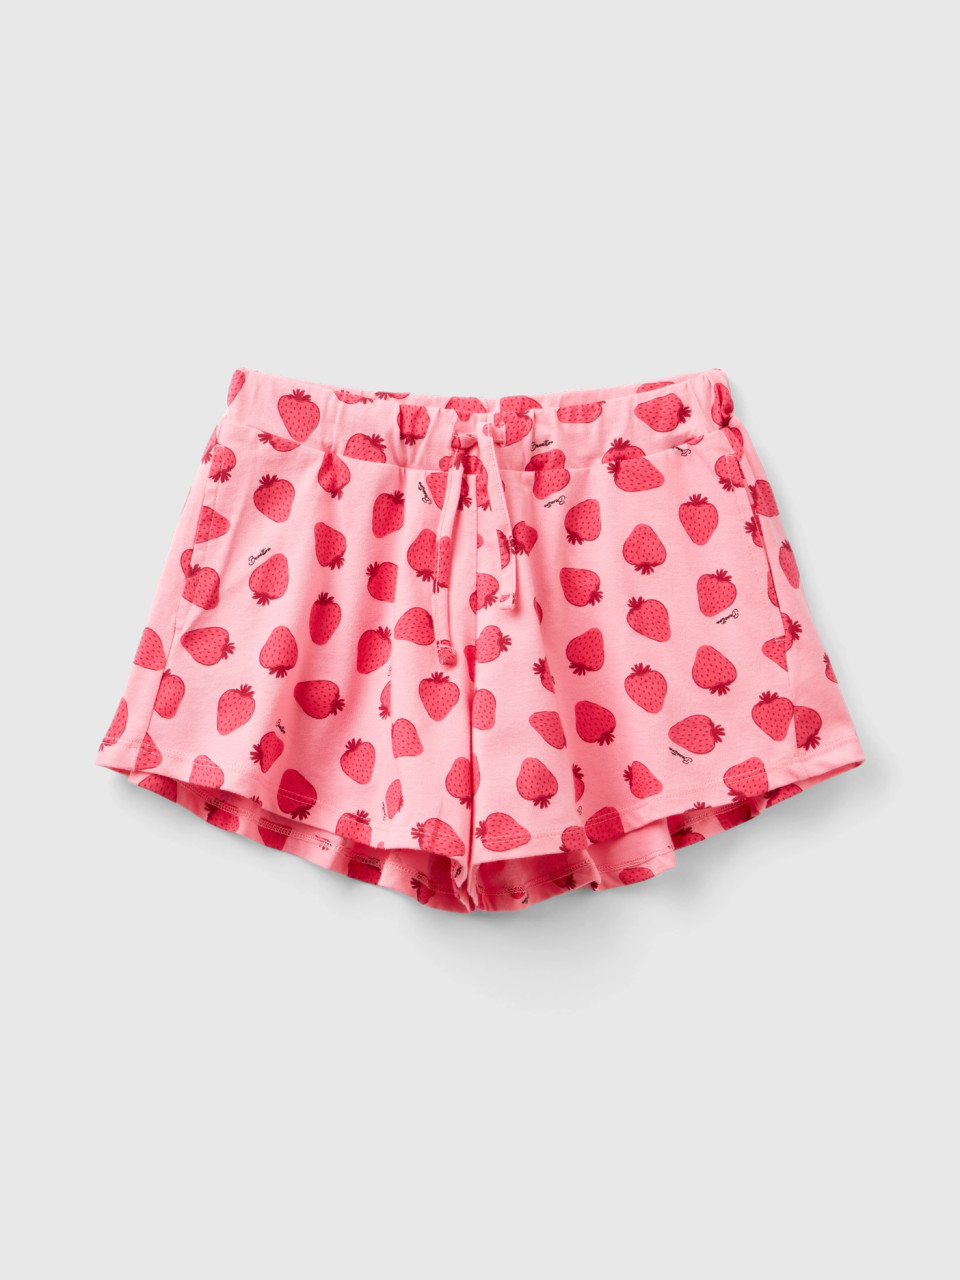 Benetton, Pink Shorts With Strawberry Print, Pink, Kids